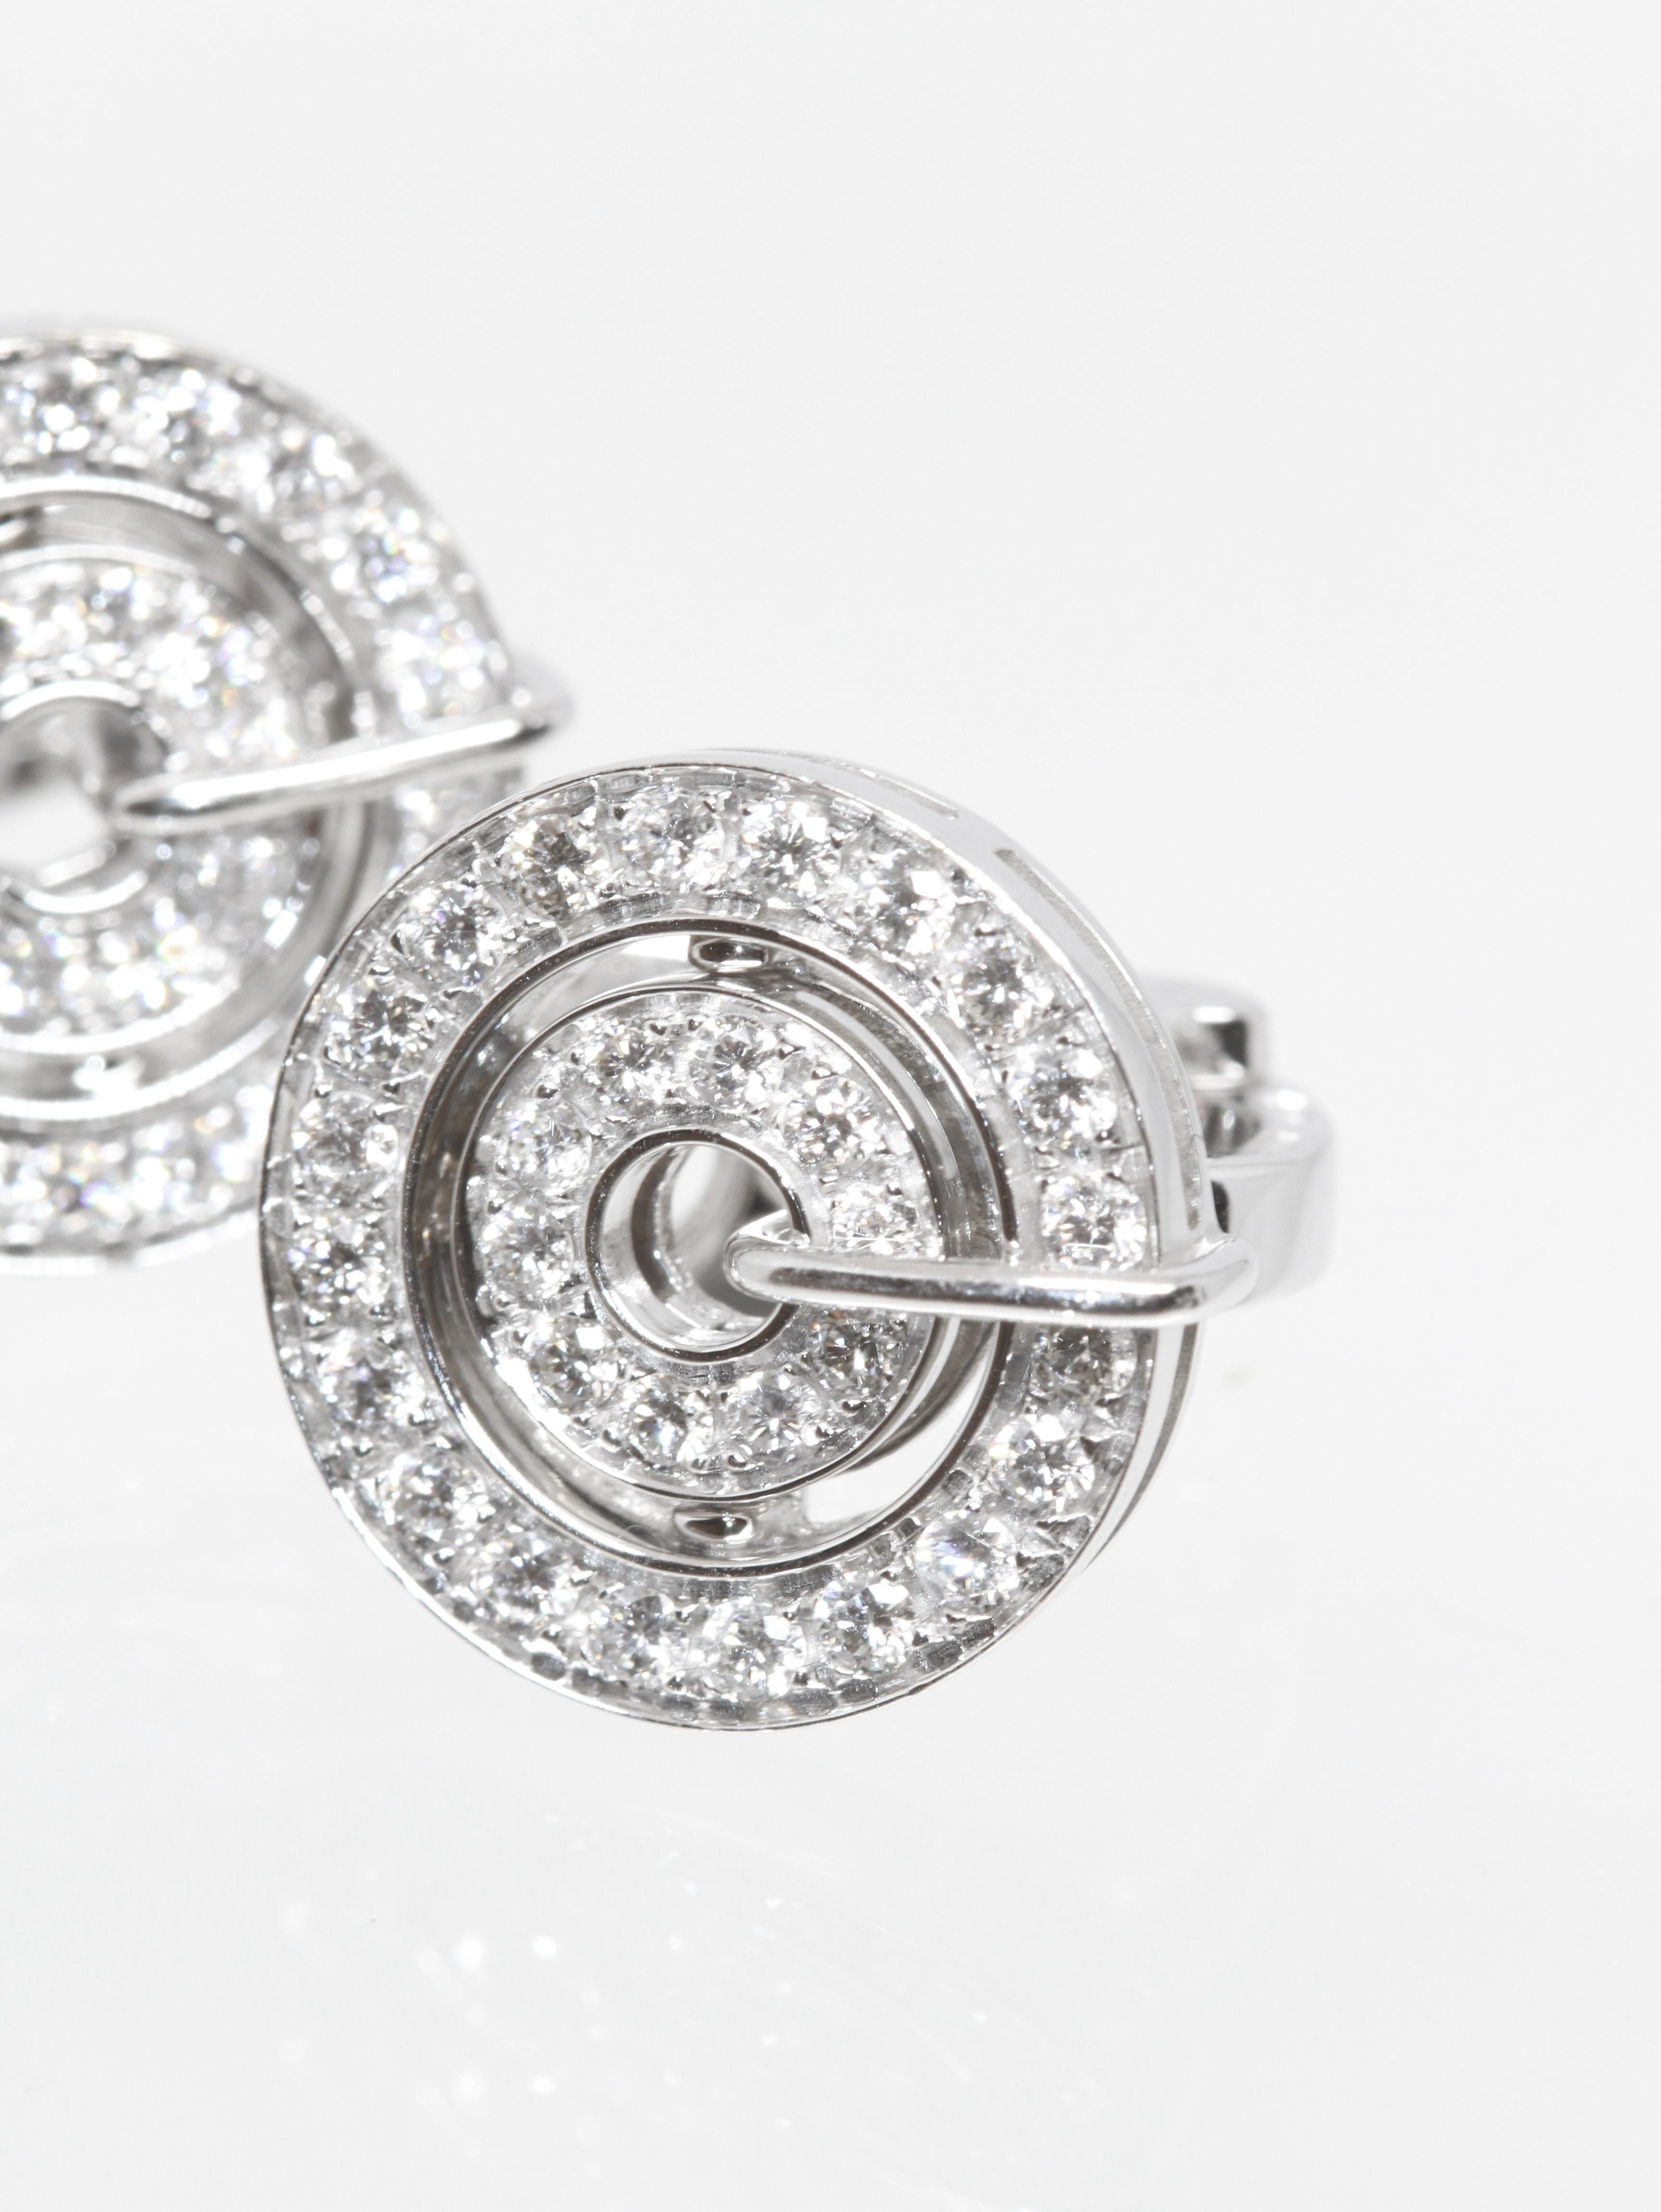 A beautiful pair of 18k white gold diamond earrings from the Astrale collection from the house of Bvlgari. 
The round earrings are each set with an inner circle with 10 diamonds and the outer with 20 diamonds. 
They have post and hinged clip